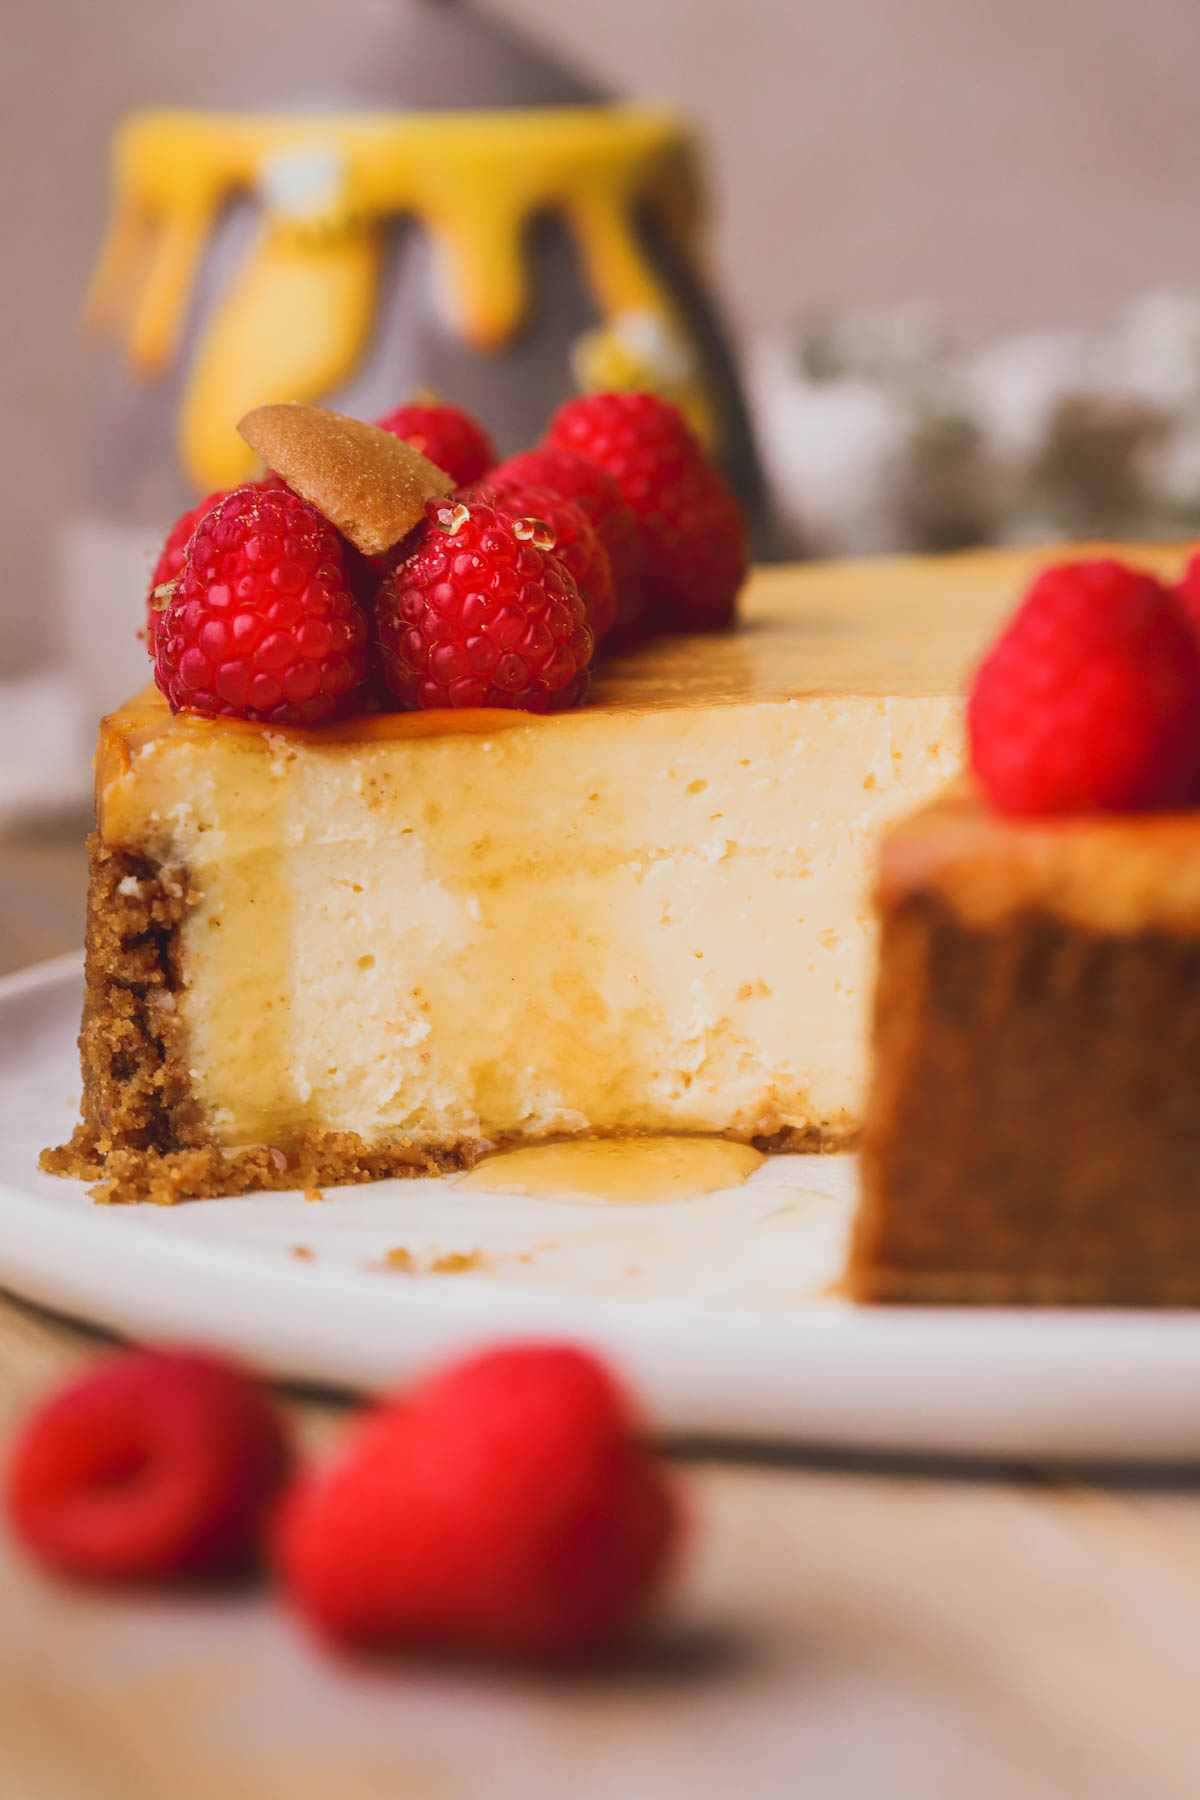 Creamy baked cheesecake with a raspberries and a drizzle of honey.